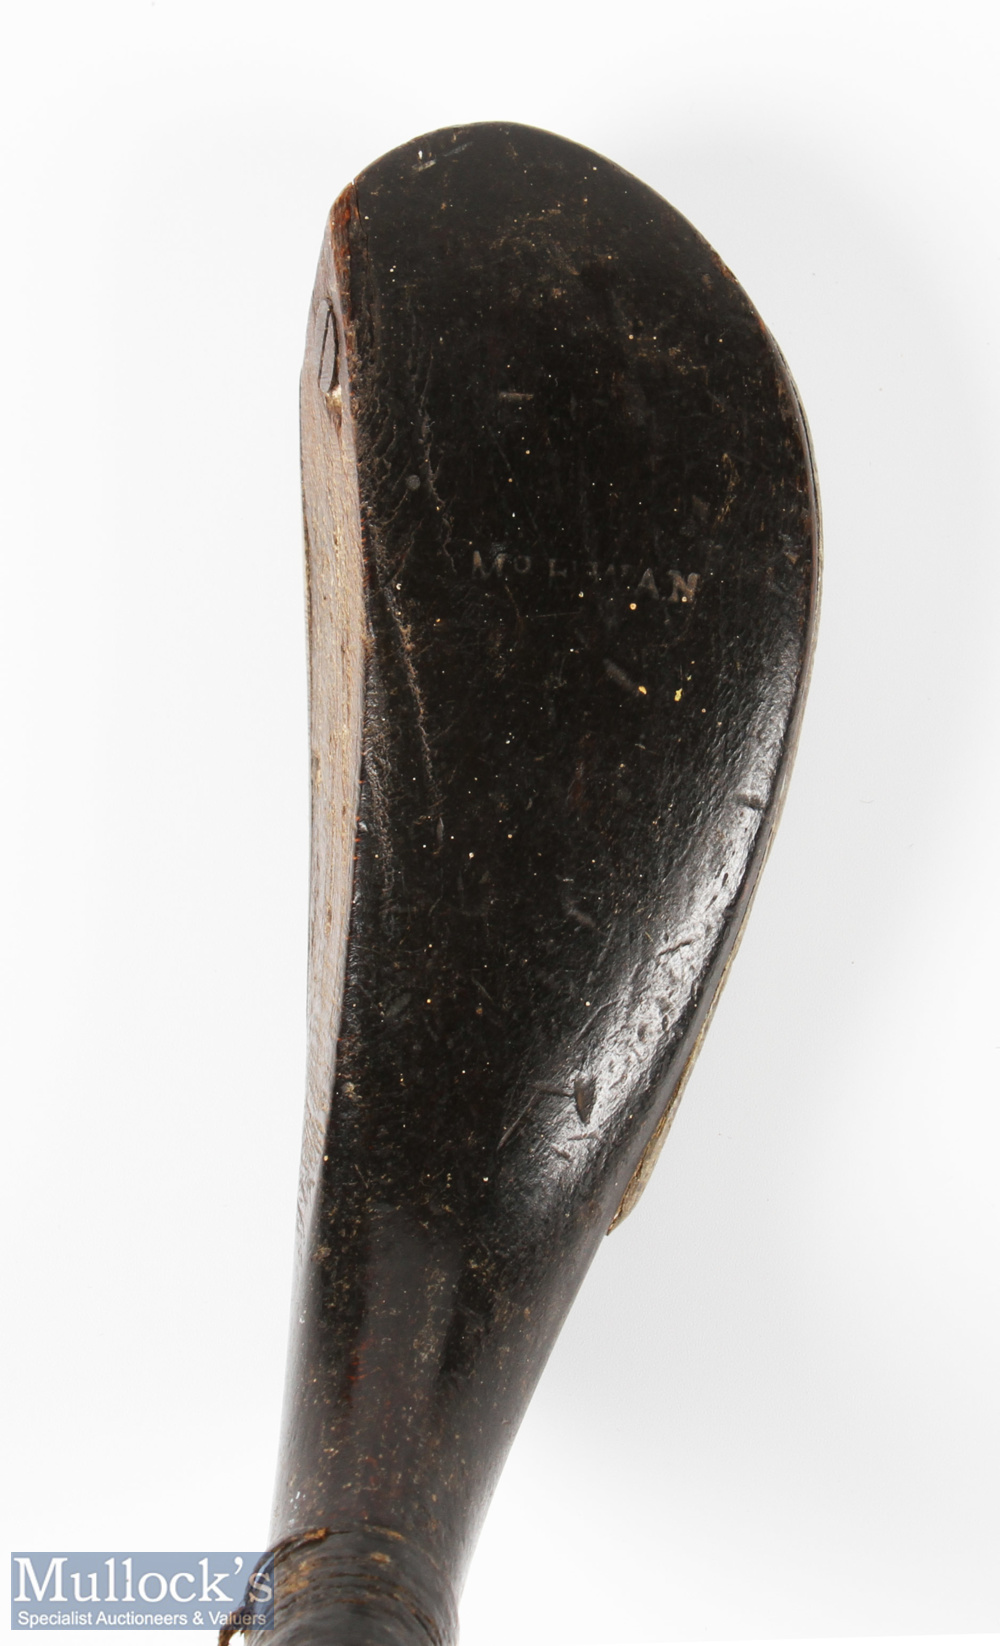 Early and interesting McEwan dark stained beech wood curved face longnose short spoon c1870 - head - Image 4 of 6